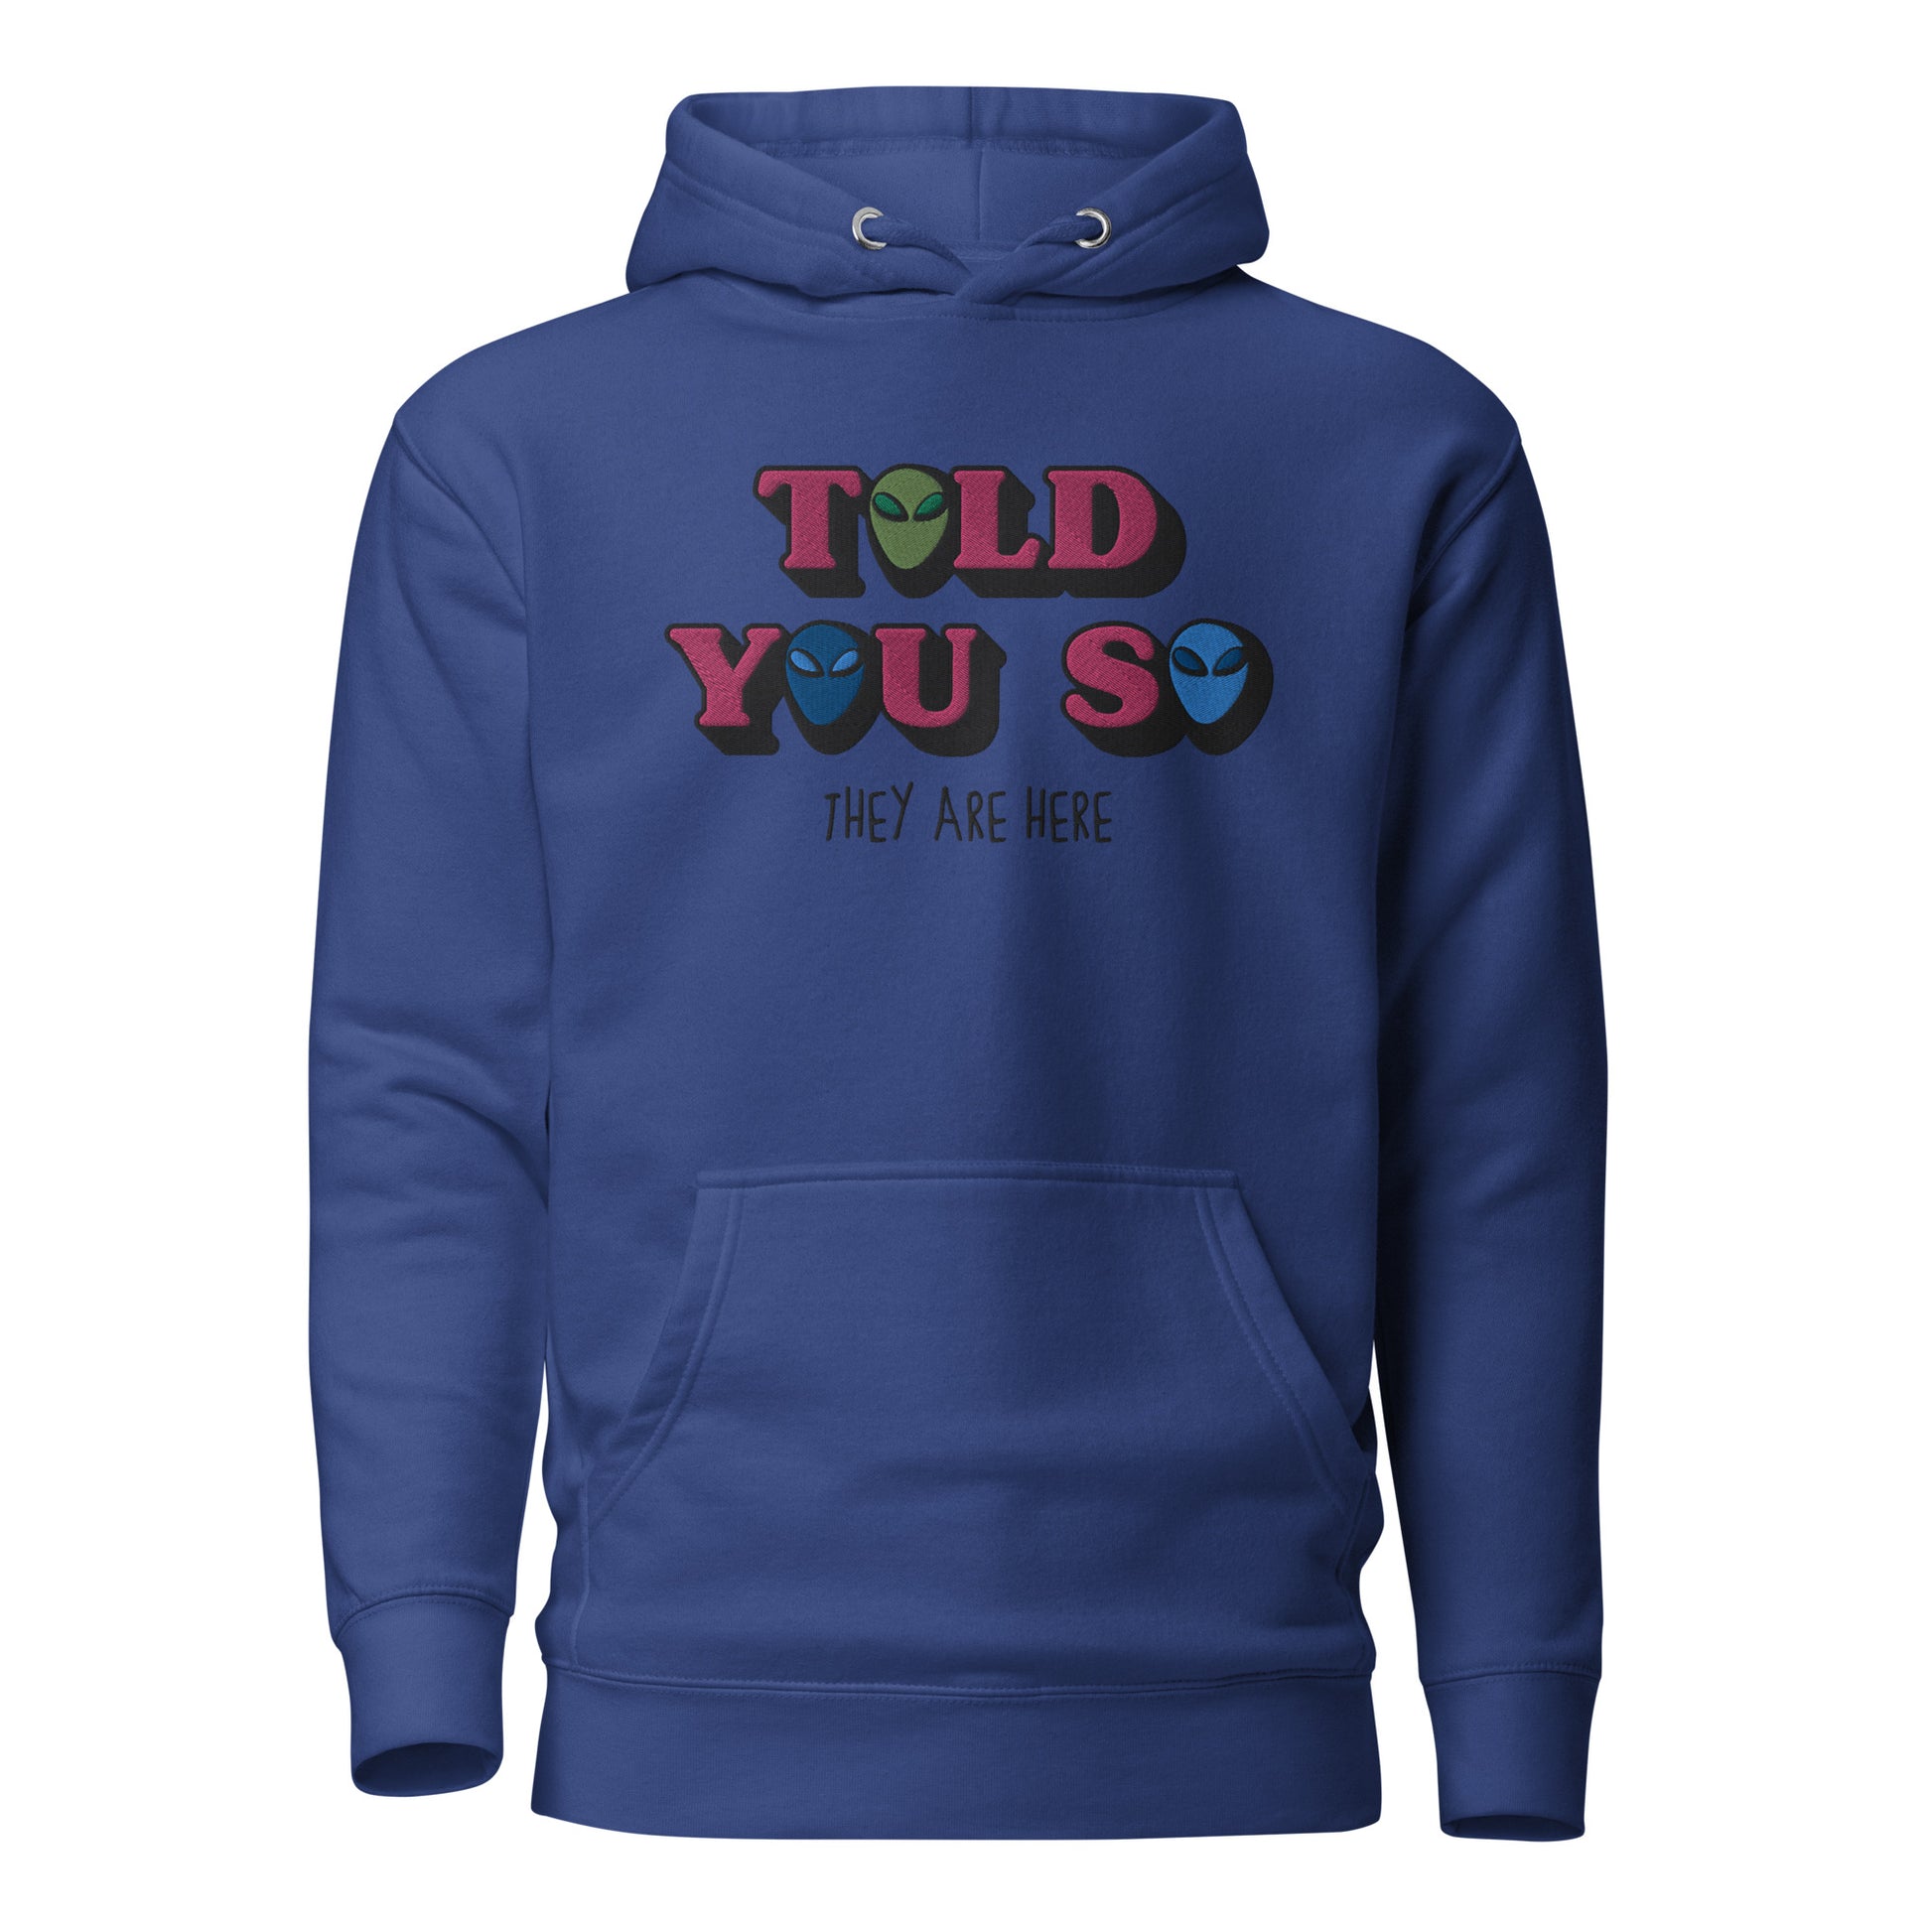 Weirdo | this ALIEN hoodie for weird people has the memes: I BELIEVE IN ALIENS, and THEY ARE HERE embroidered at the front of the purple hoodie. This hoodie is specially designed for you weirdos who believe the aliens are already amongst us.